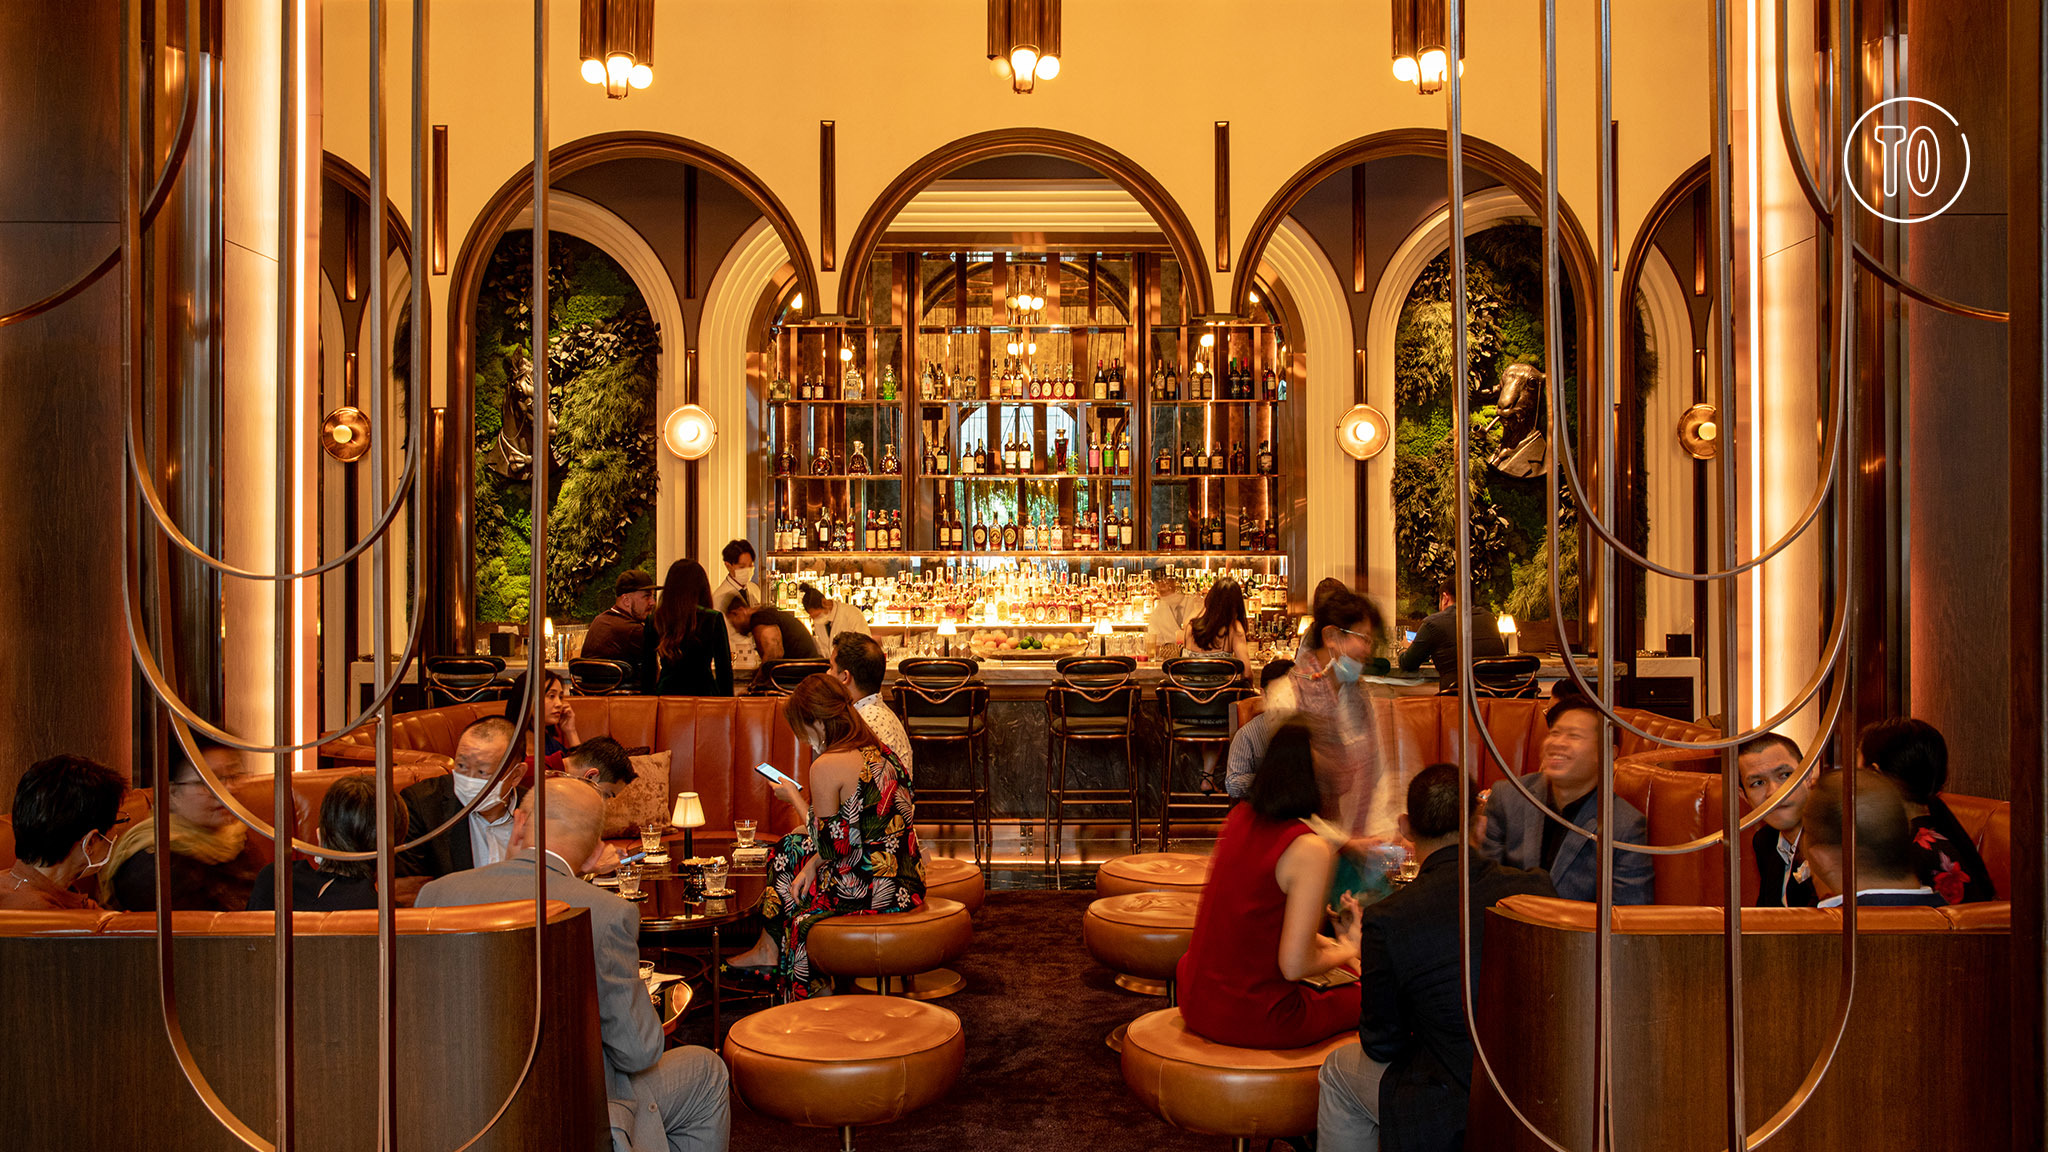 Four Seasons Bangkok is hoping to take over Bangkok's drinking scene with a  swanky new bar.